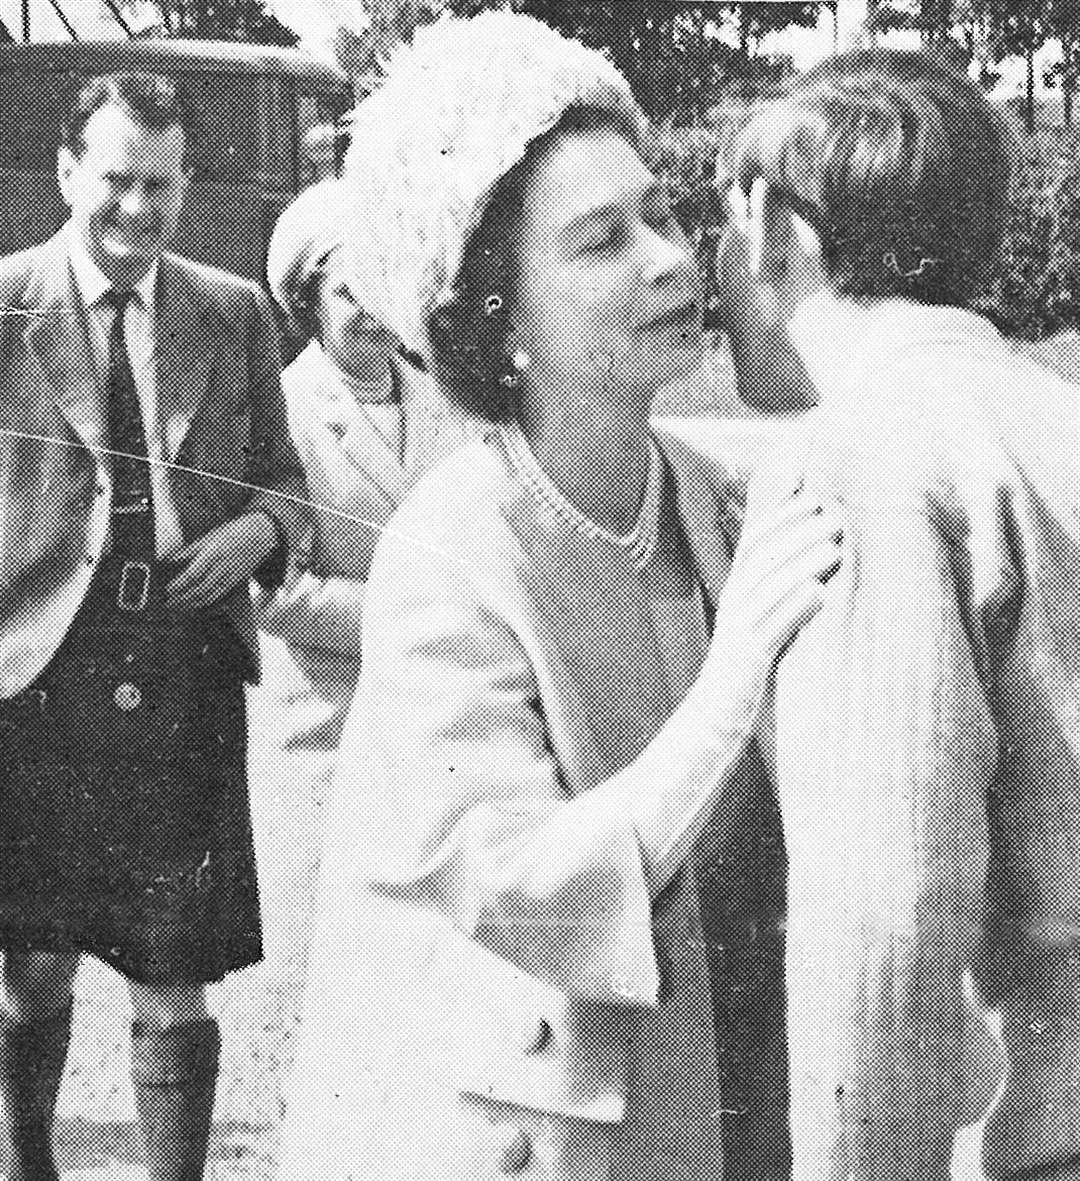 Greeting Prince Charles at Gordonstoun in July 1967. Pictured behind are Captain Iain Tennant and his wife Margaret.